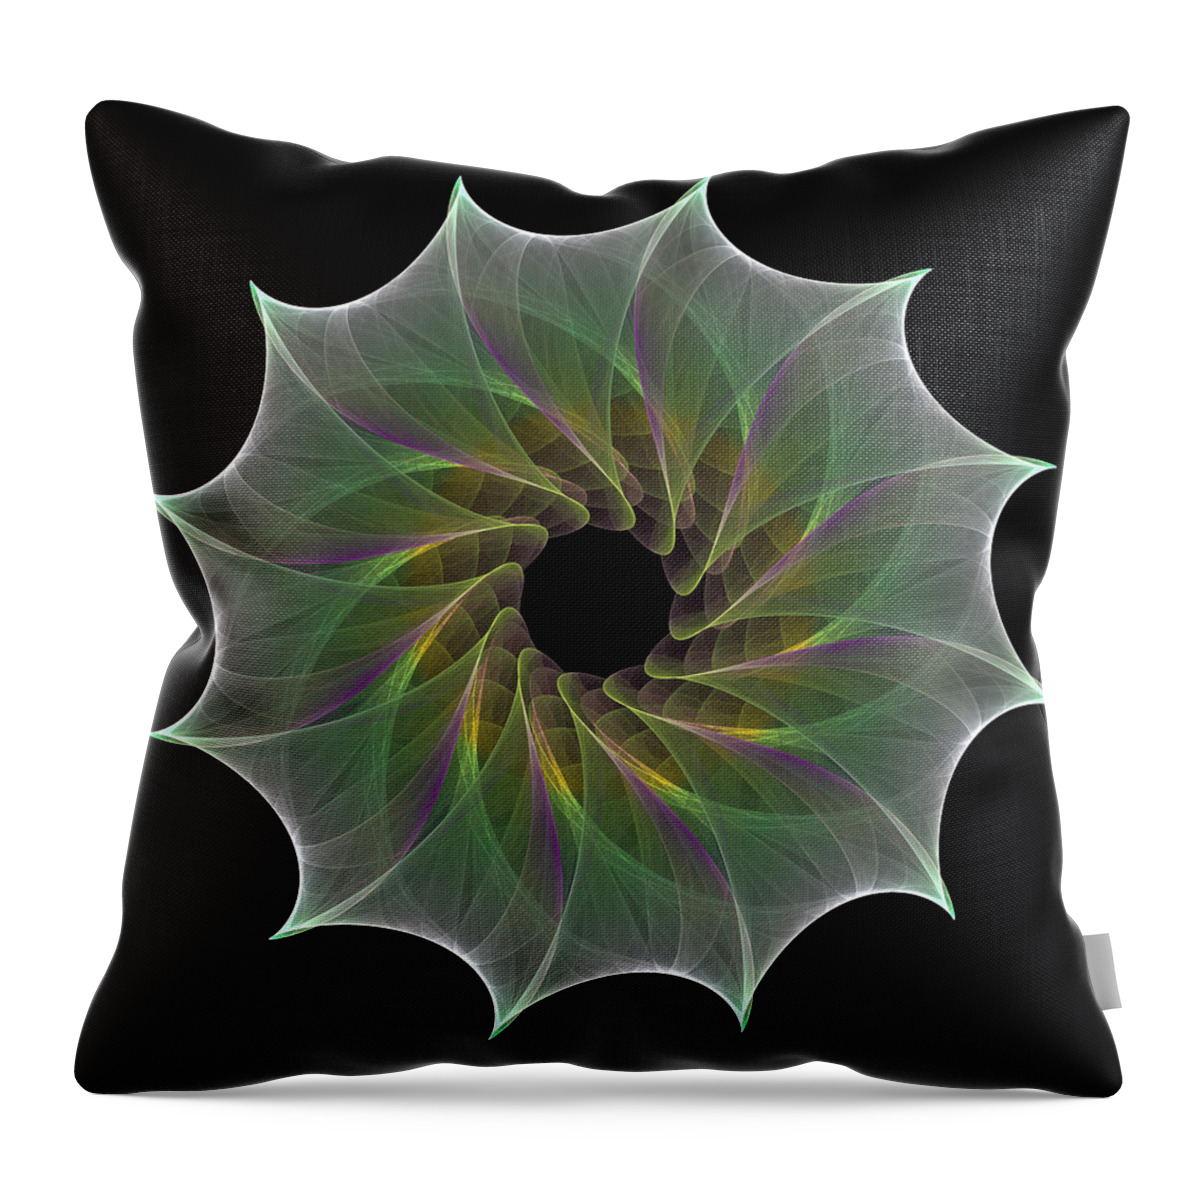 Fractal Throw Pillow featuring the digital art The Eye Of God by Denise Beverly